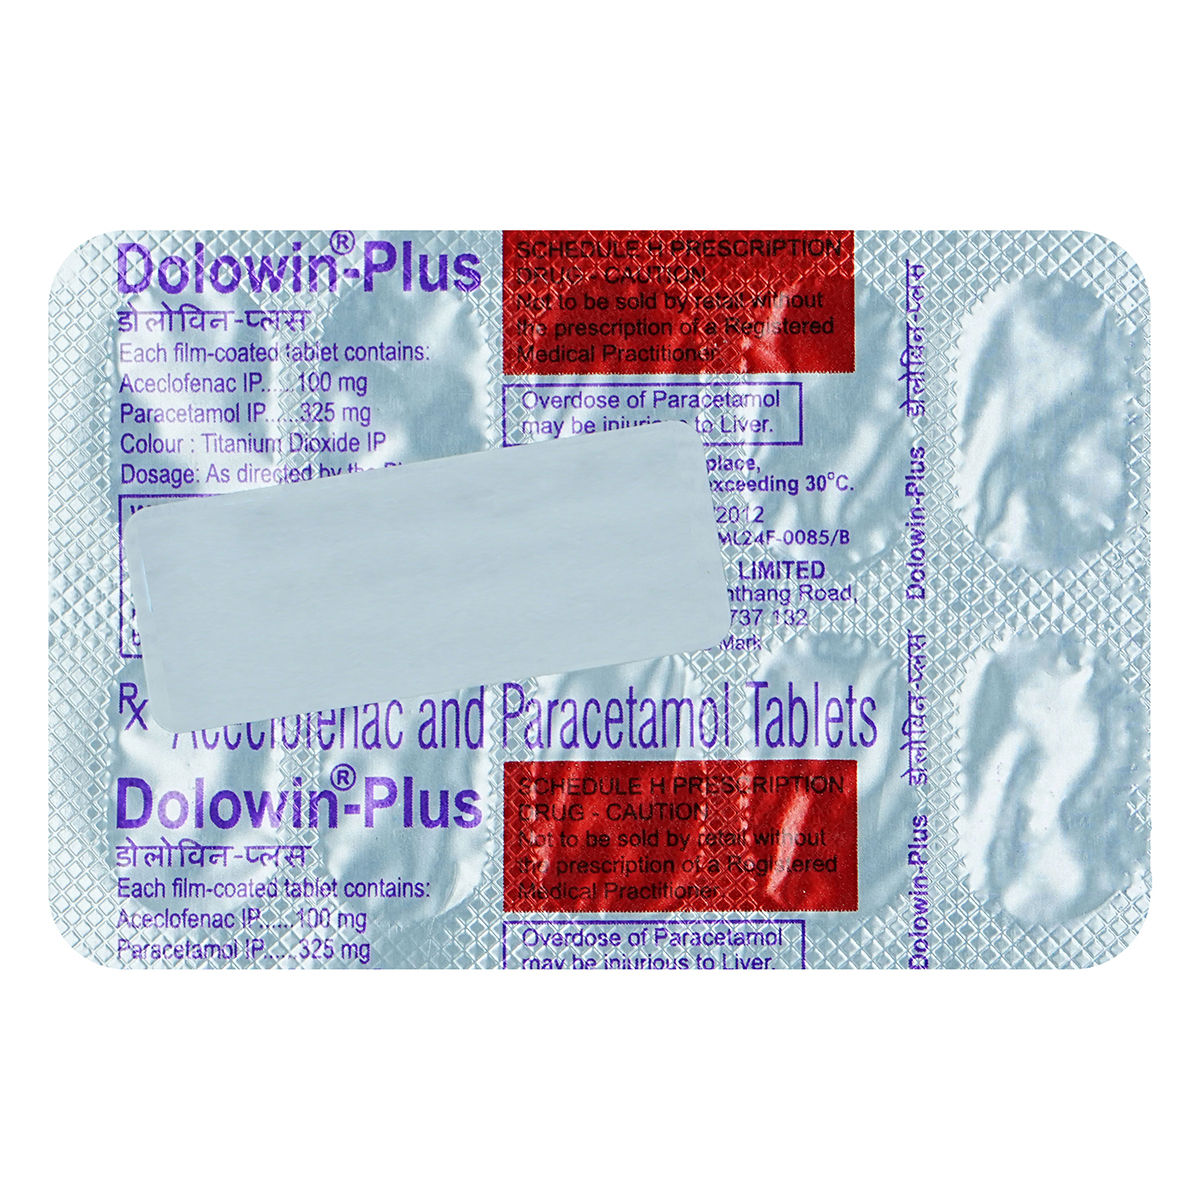 Dolowin Plus Tablet, Uses, Side Effects, Price